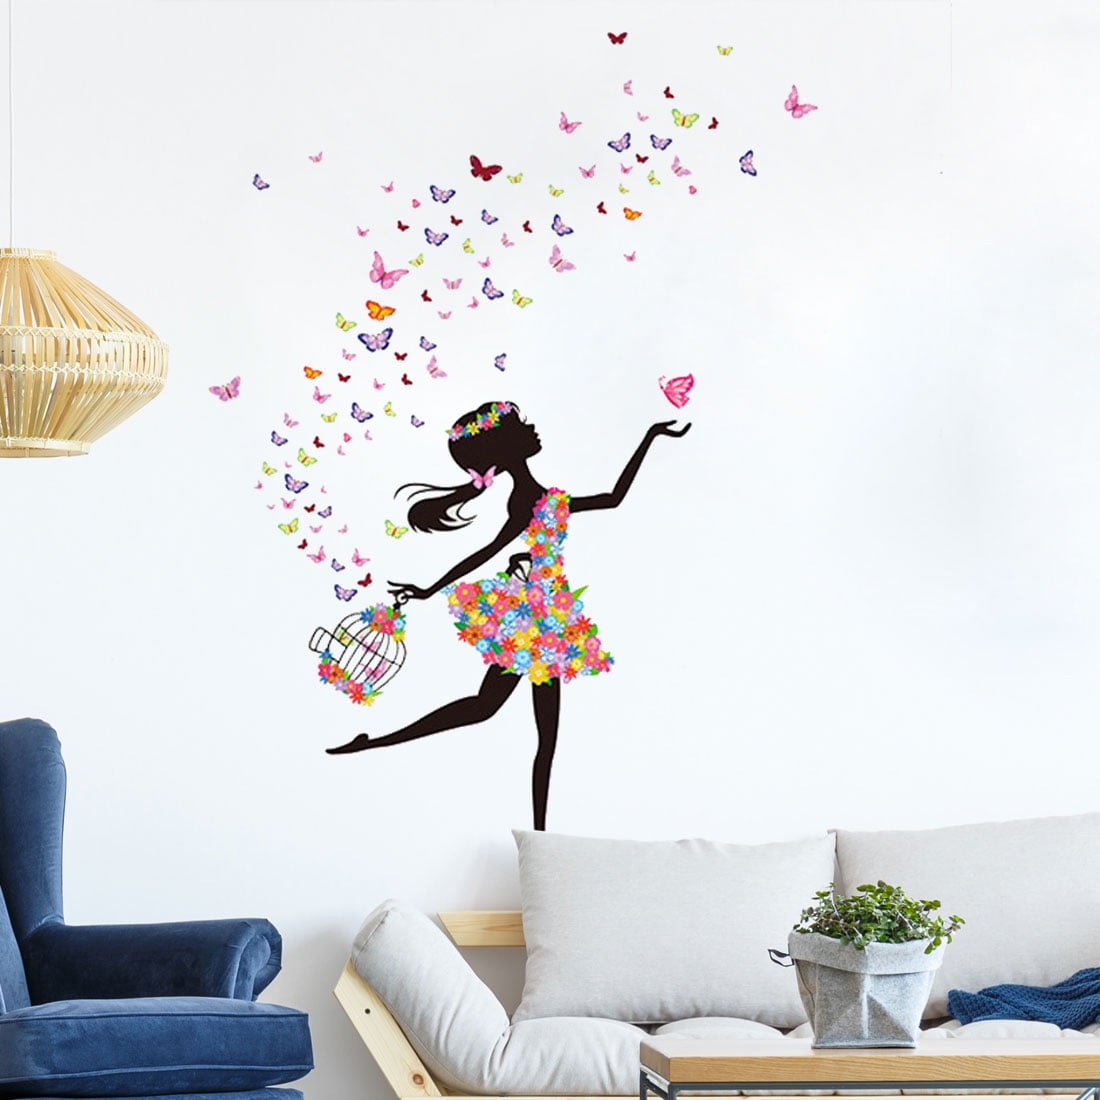  Girl Club Stickers Nude Stickers Wall Stickers Poster Vinyl  Wall Stickers Wall Stickers Mural Girl Stickers 22 X 28 CM : DIY, Tools &  Garden